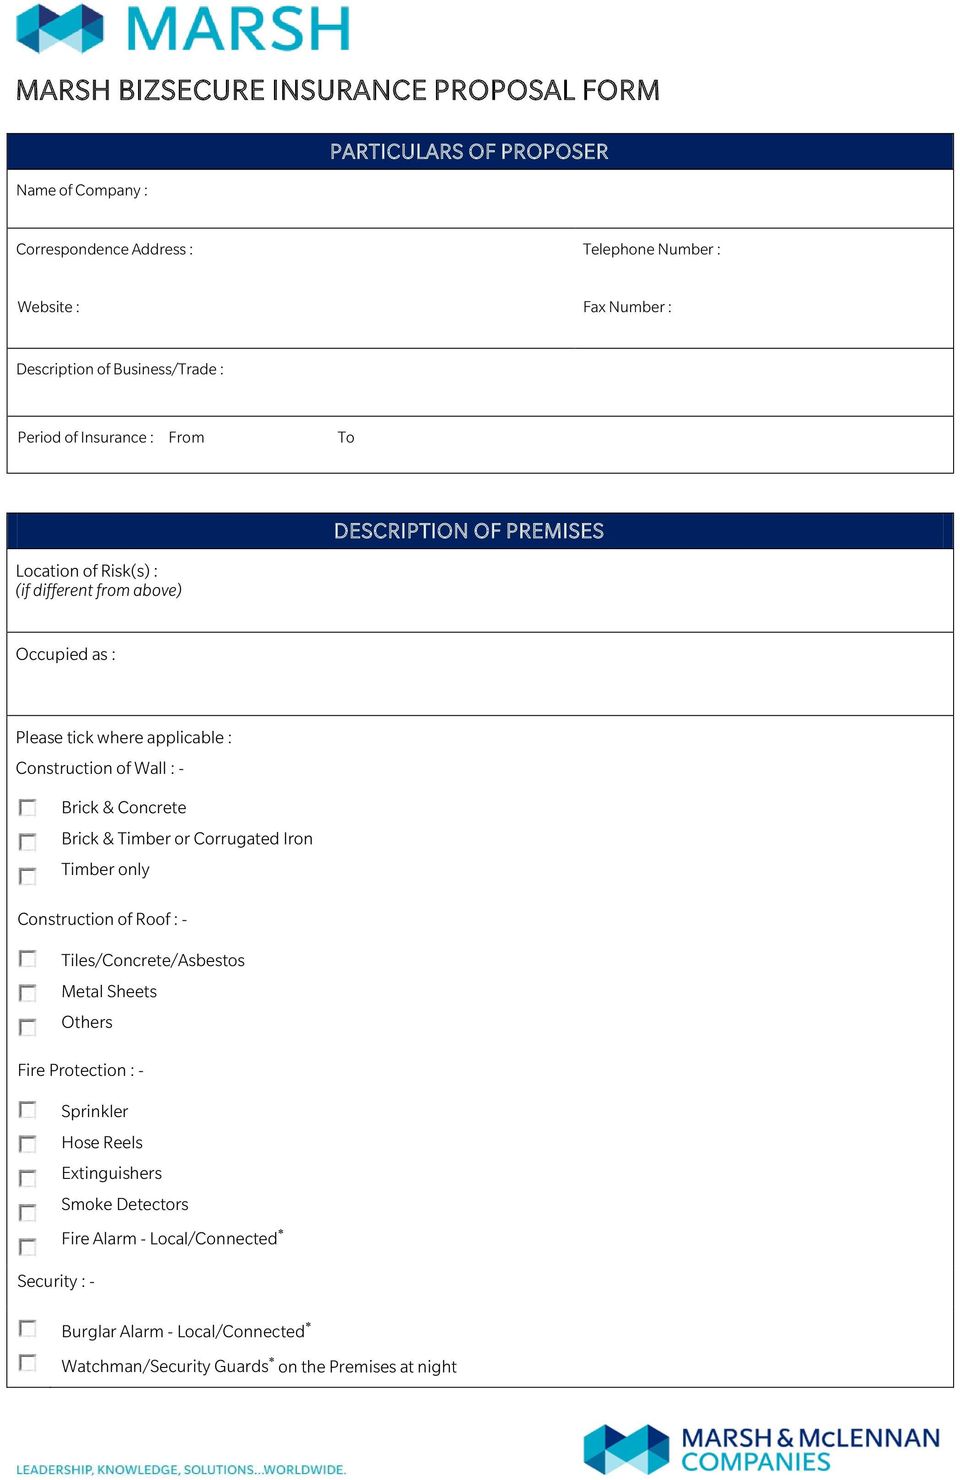 MARSH BIZSECURE INSURANCE PROPOSAL FORM - PDF Free Download Within Insurance Proposal Template